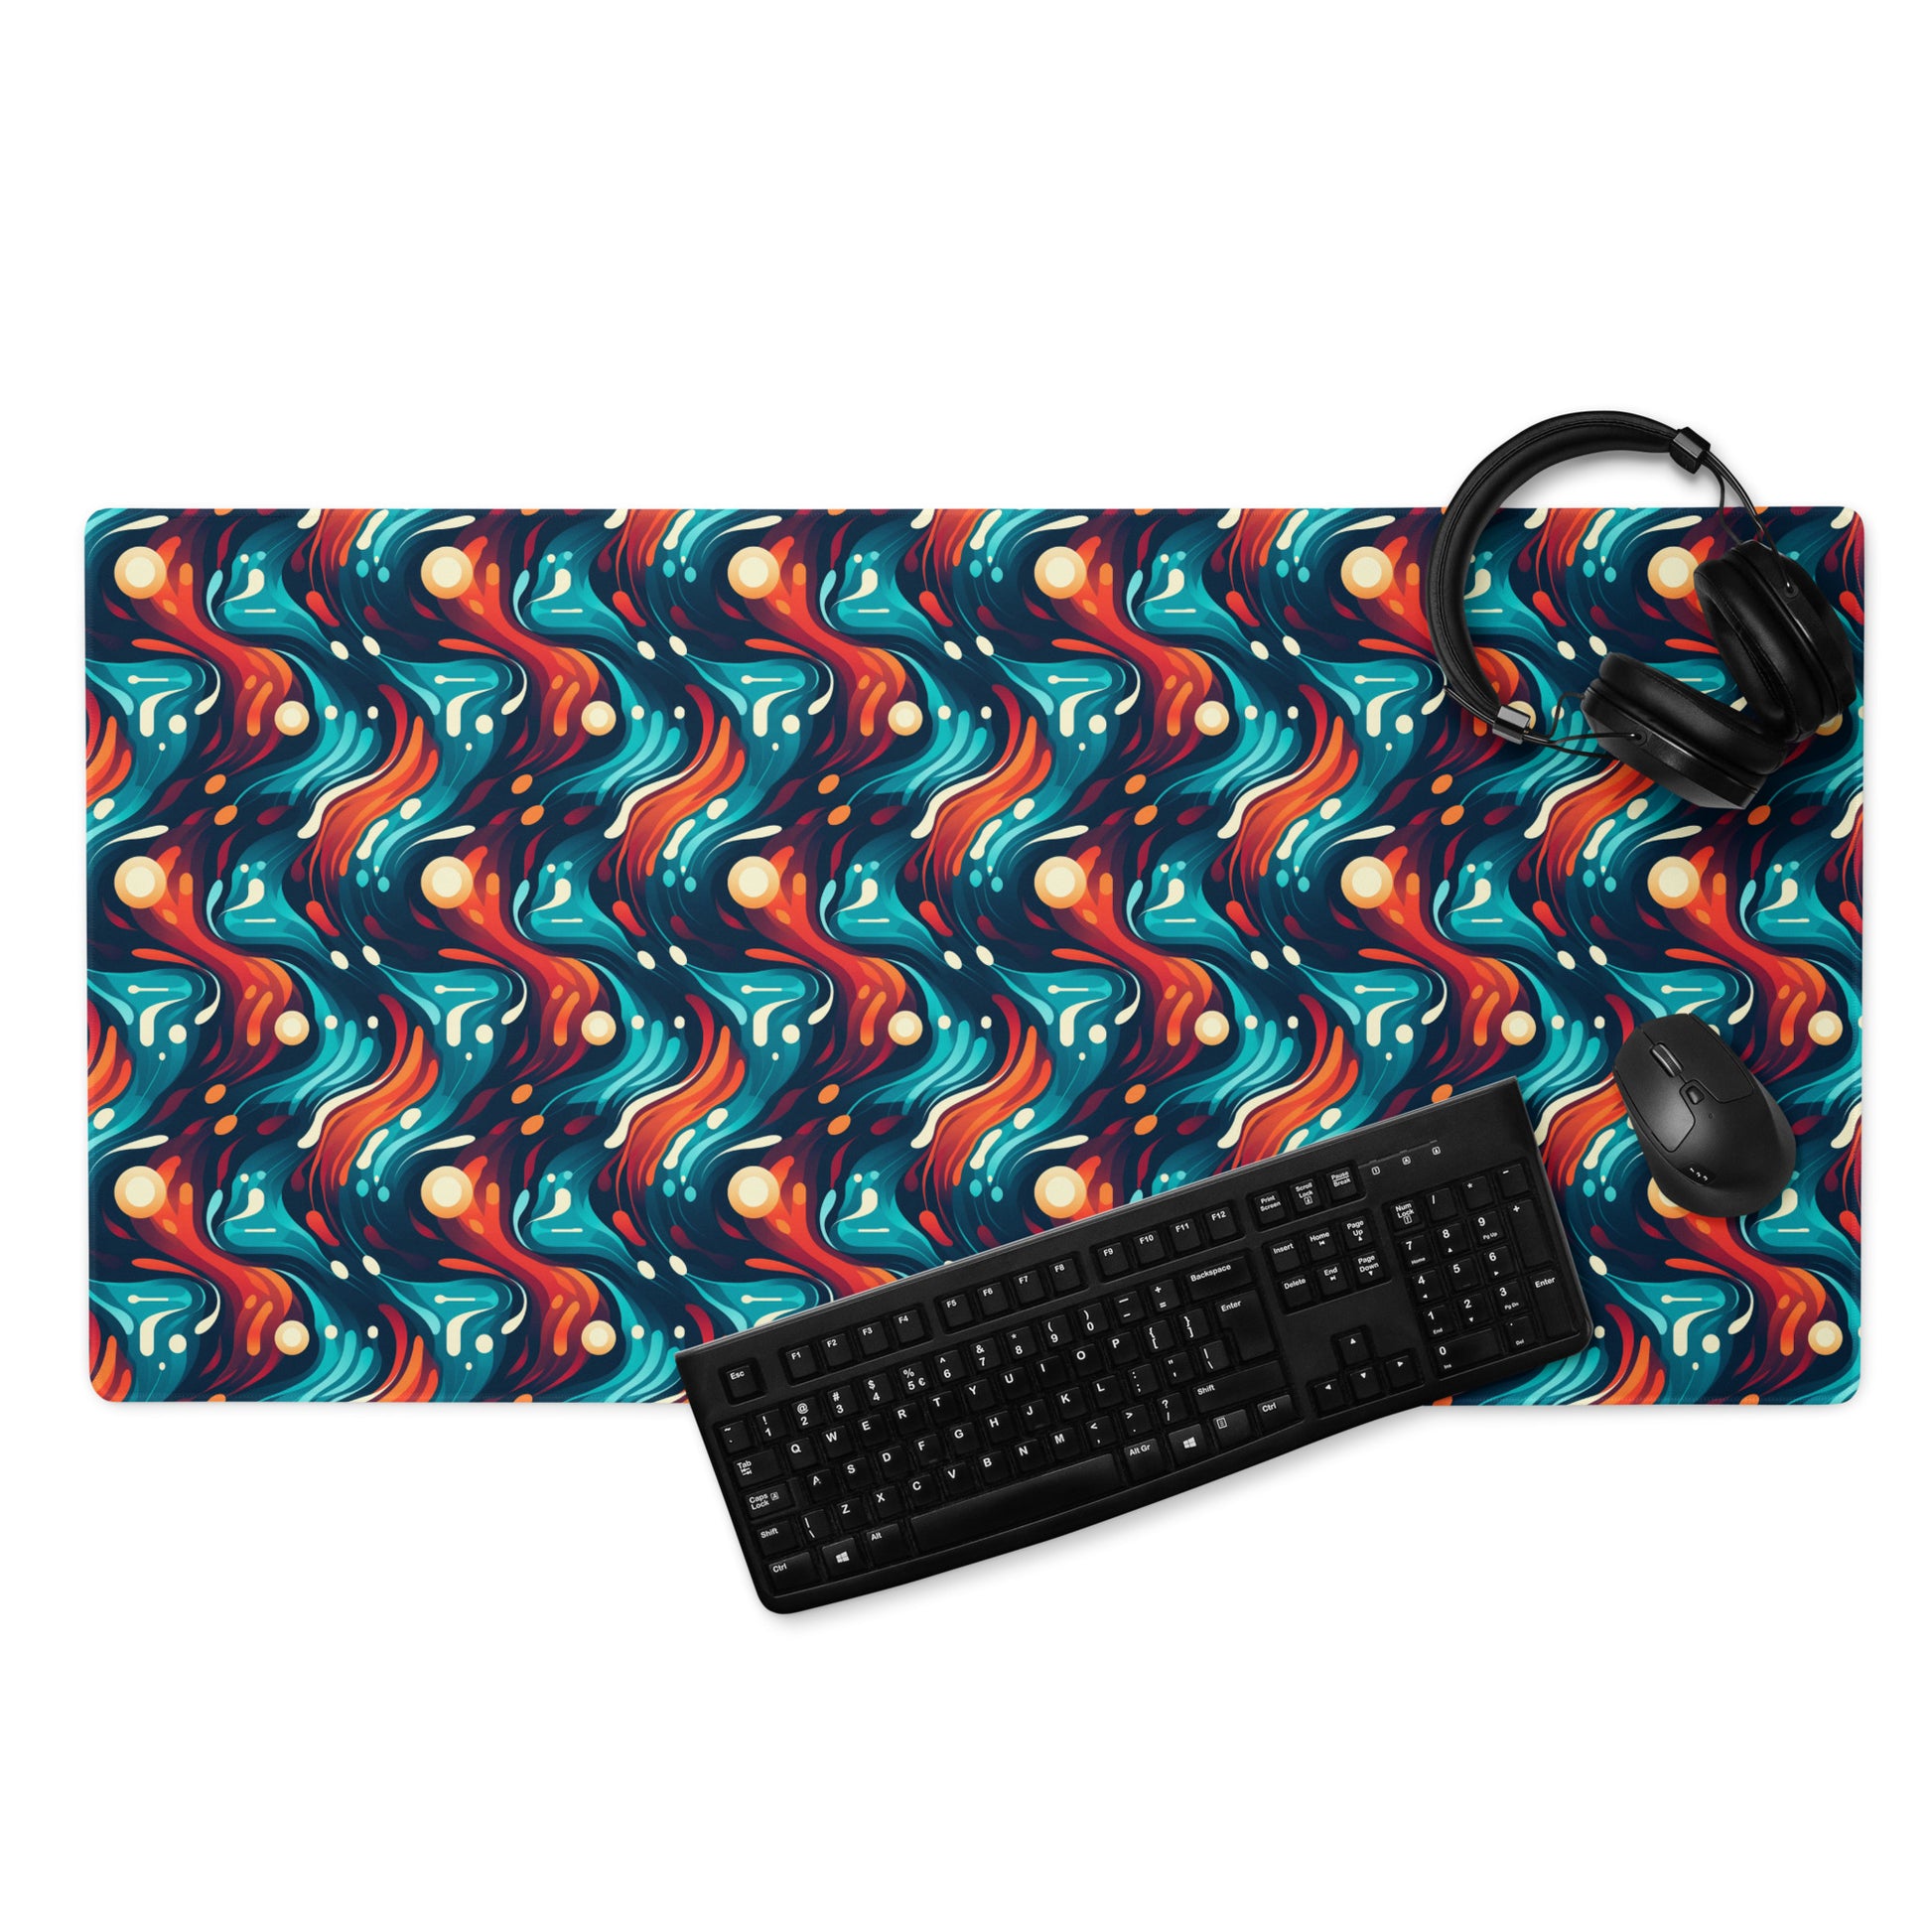 A 36" x 18" desk pad with a blue and orange wavy pattern. With a keyboard, mouse, and headphones sitting on it.